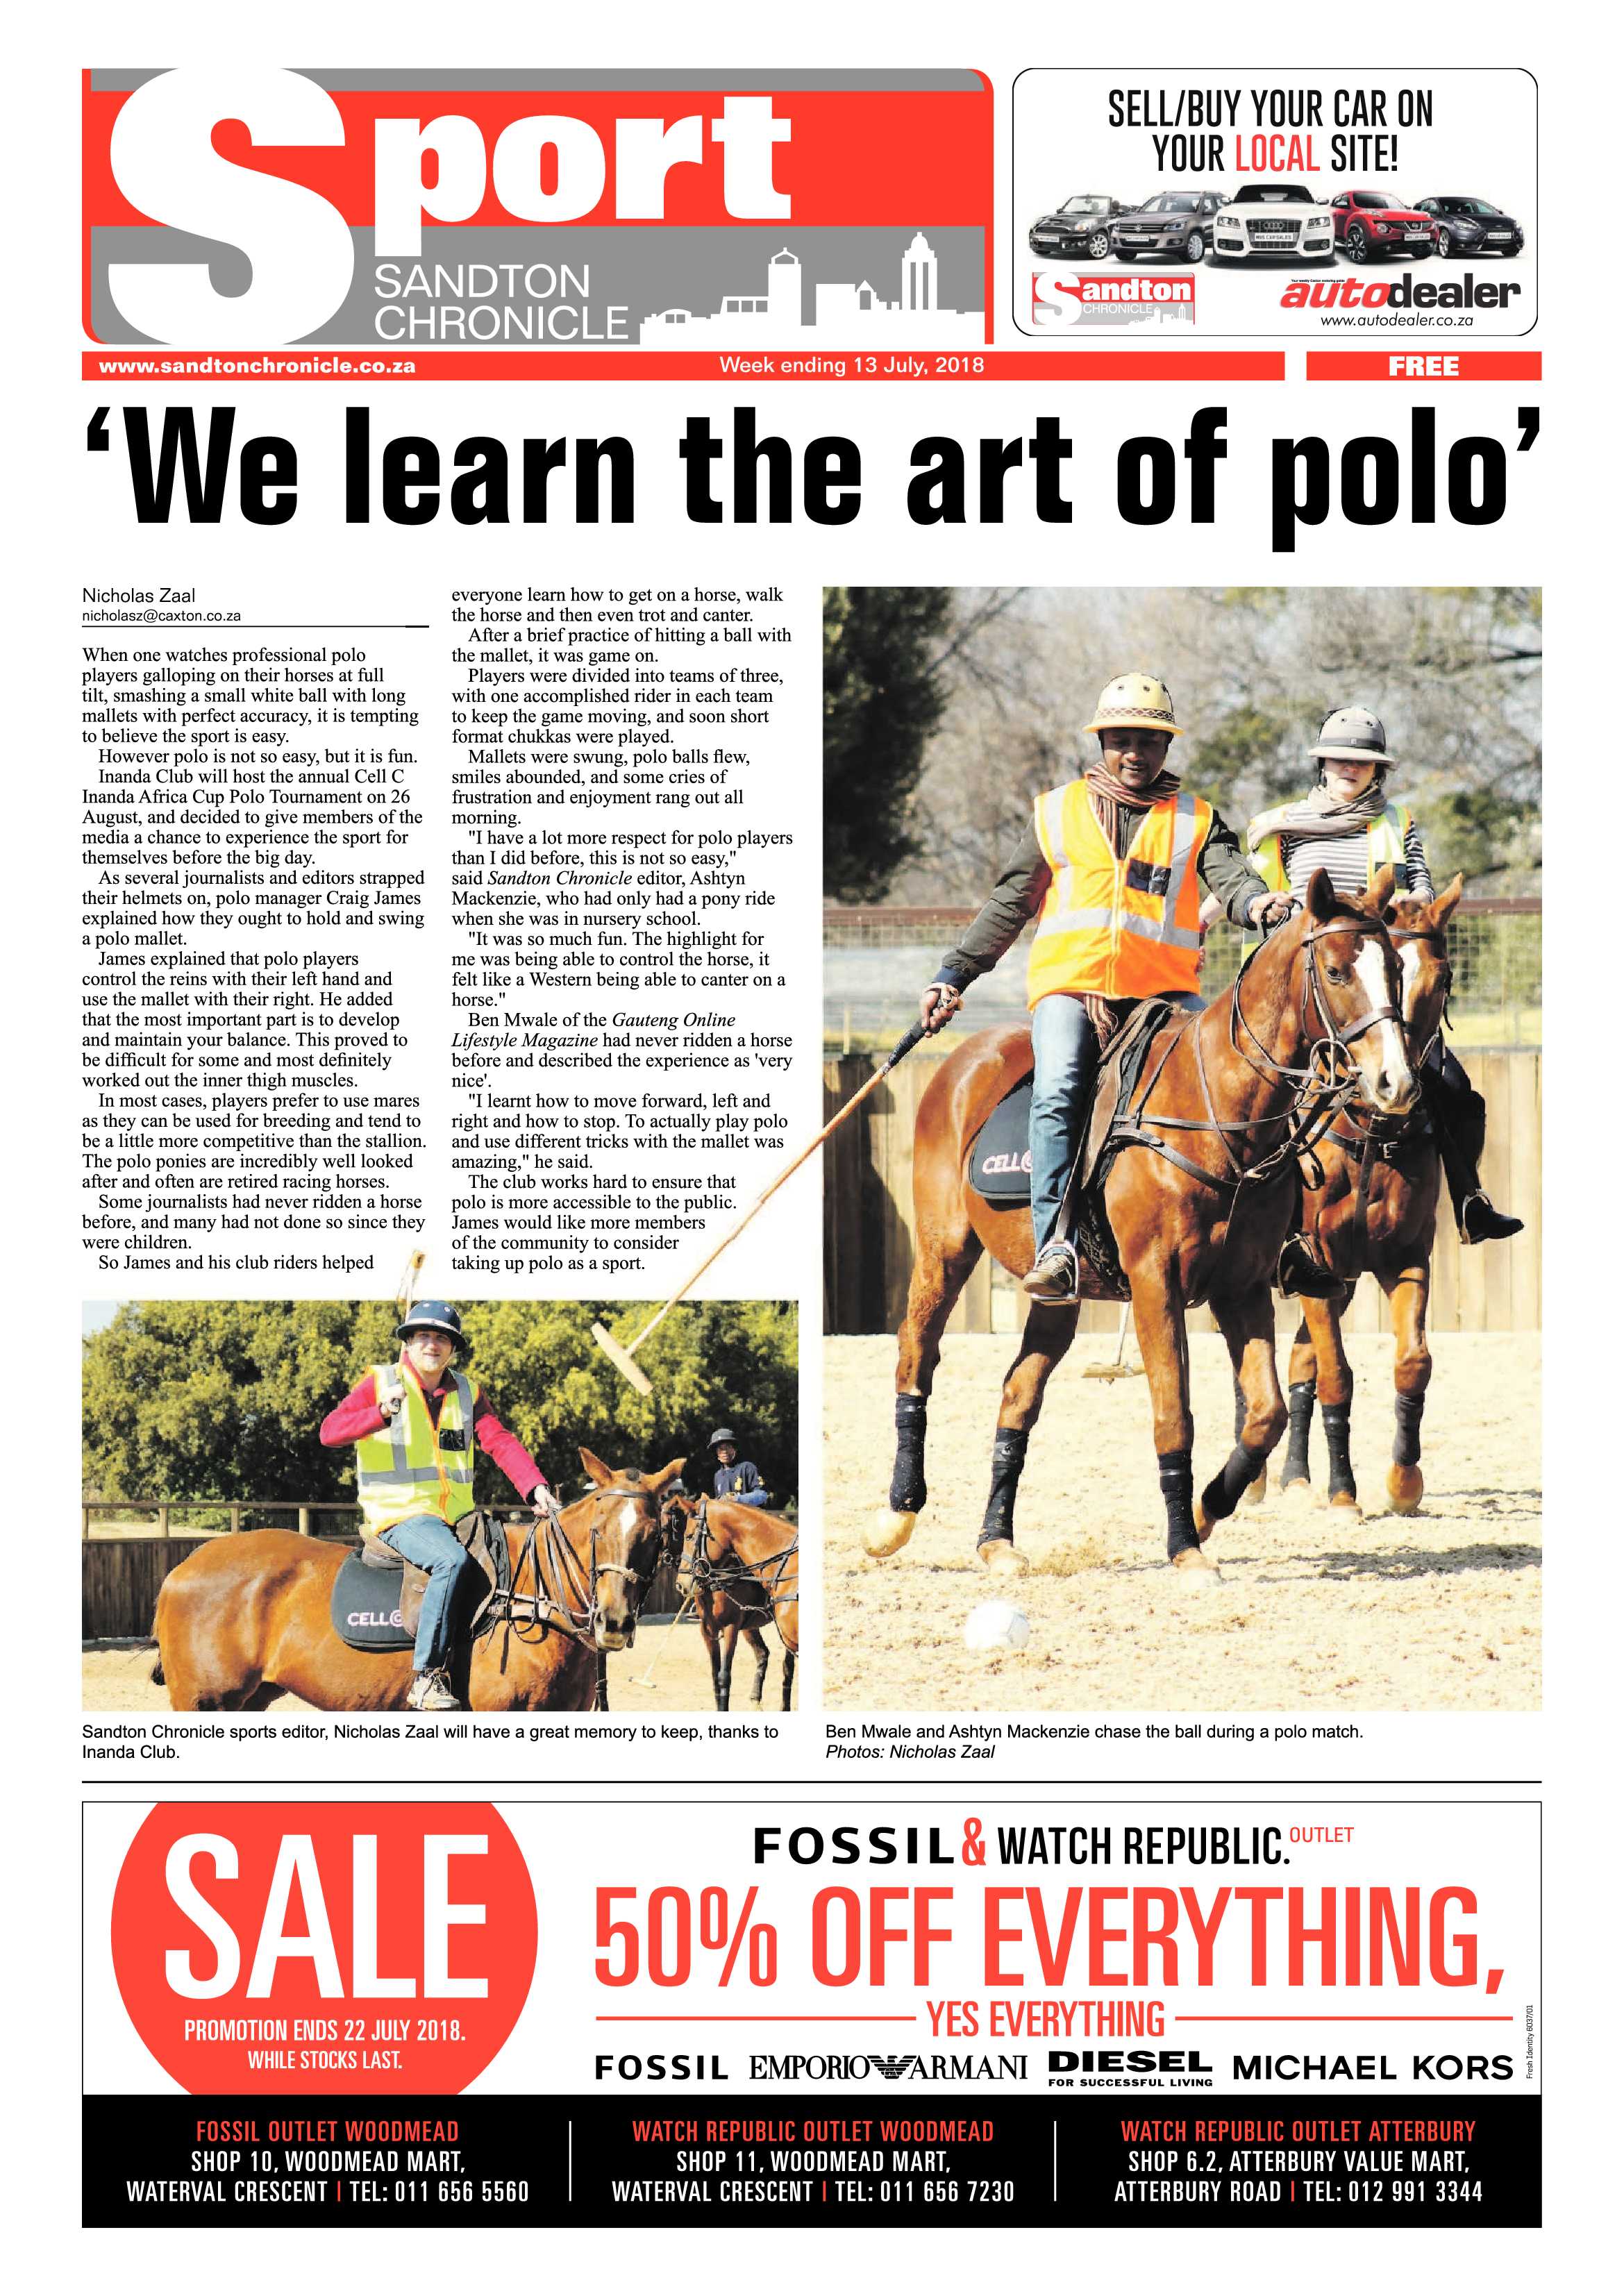 Sandton Chronicle 13 July, 2018 page 20